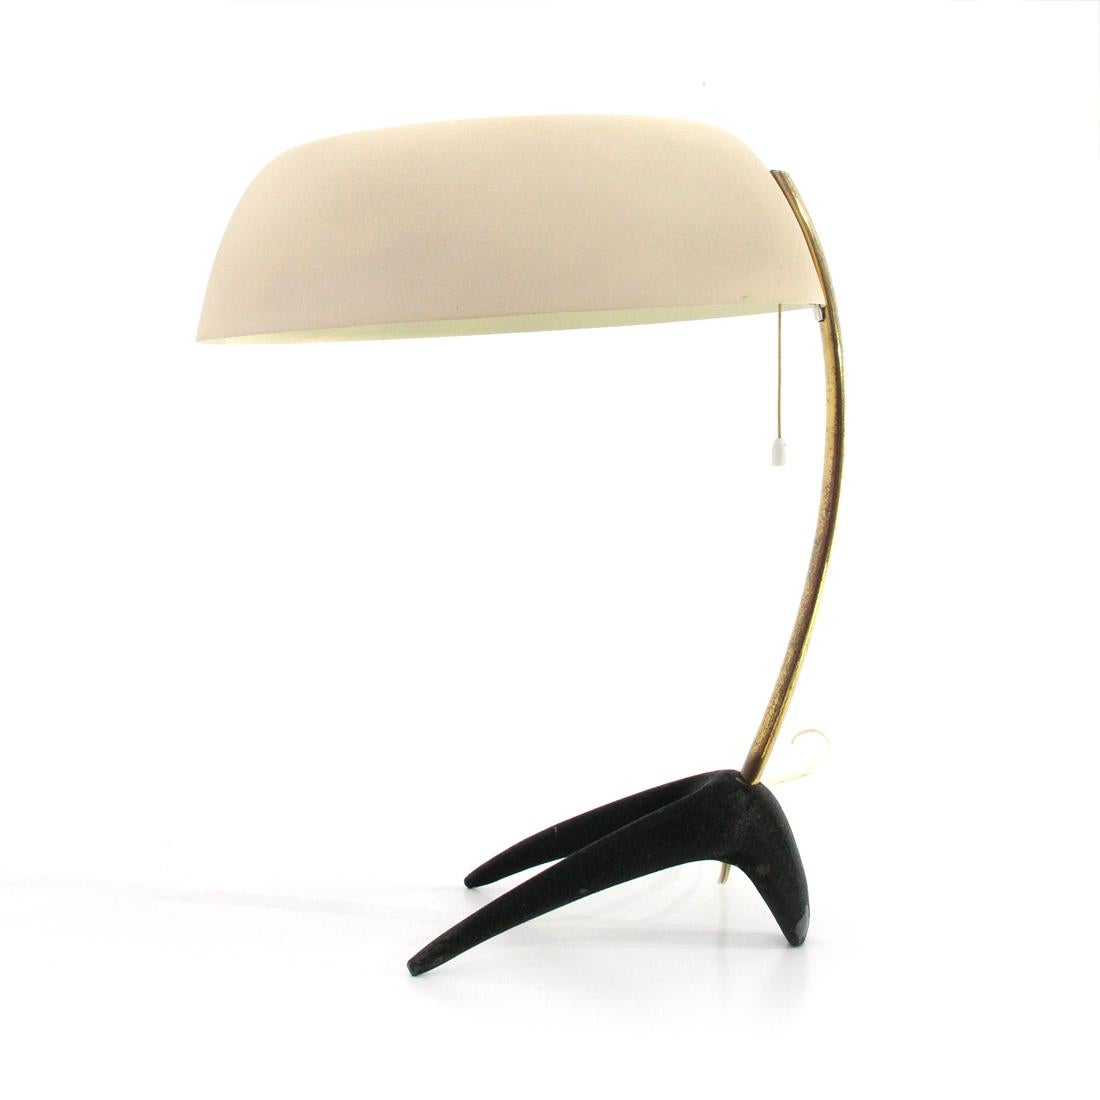 Table lamp produced in the 1950s by Philips based on a design by Louis Kalff.
Claw-shaped base in black painted metal with cracked finish.
Brass stem.
White painted aluminum diffuser with white perspex shell.
Wire switch.
Good general